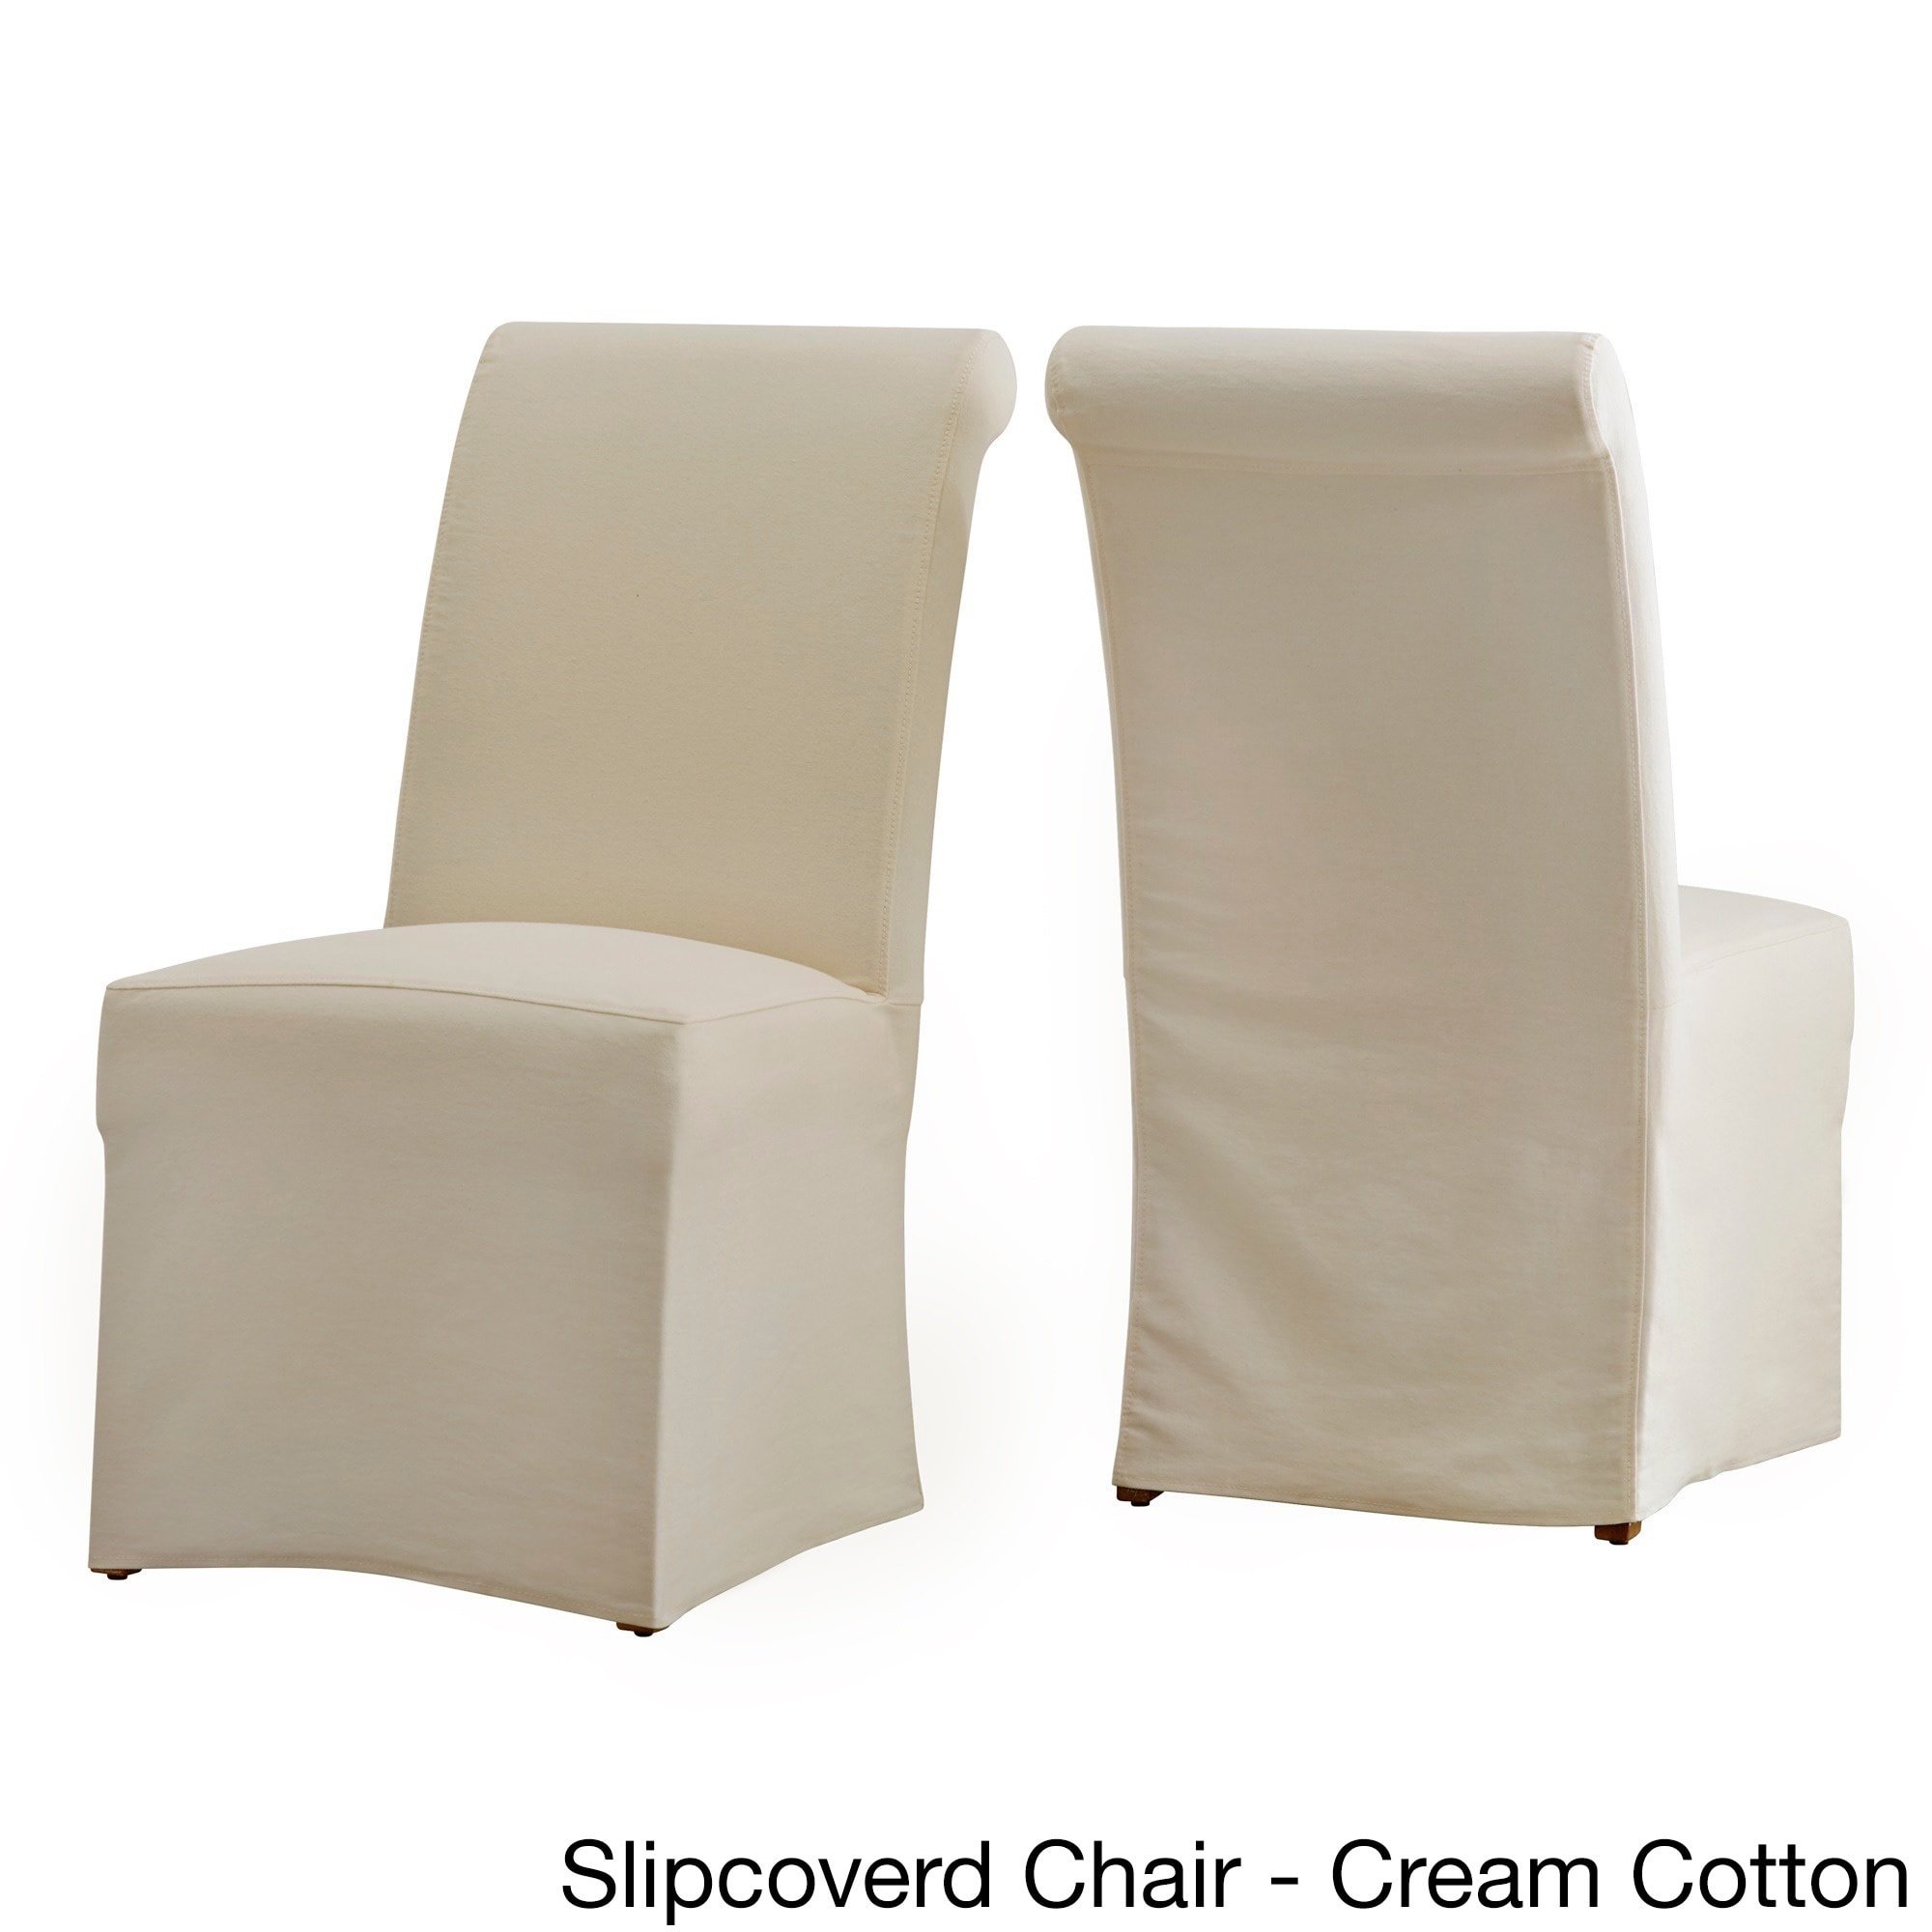 Potomac Slipcovered Rolled Back Parsons Chairs Set Of 2 By Inspire Q Artisan On Sale Overstock 12501686